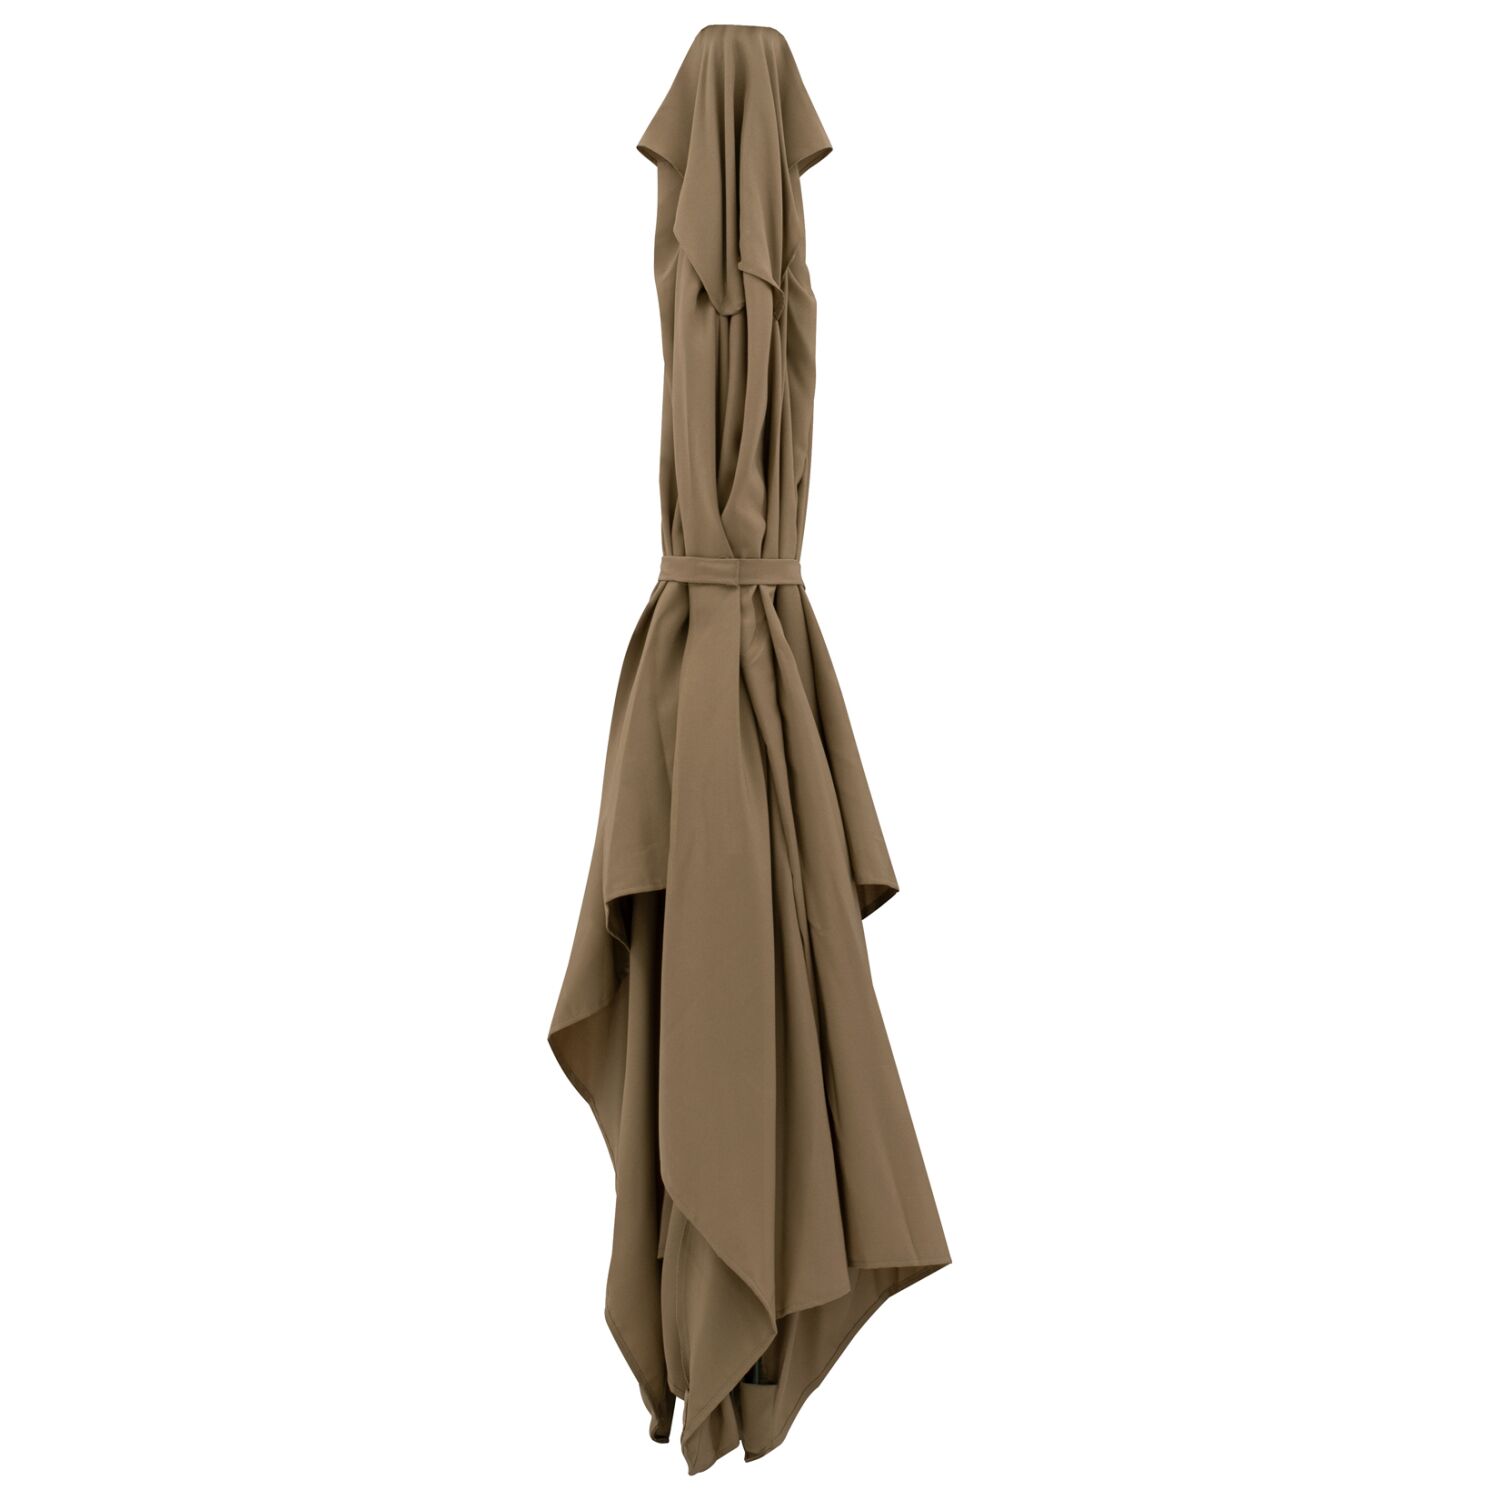 REPLACEMENT SHADE FOR UMBRELLA HM6029.02-MOCHA-COLORED POLYESTER- 180X270cm